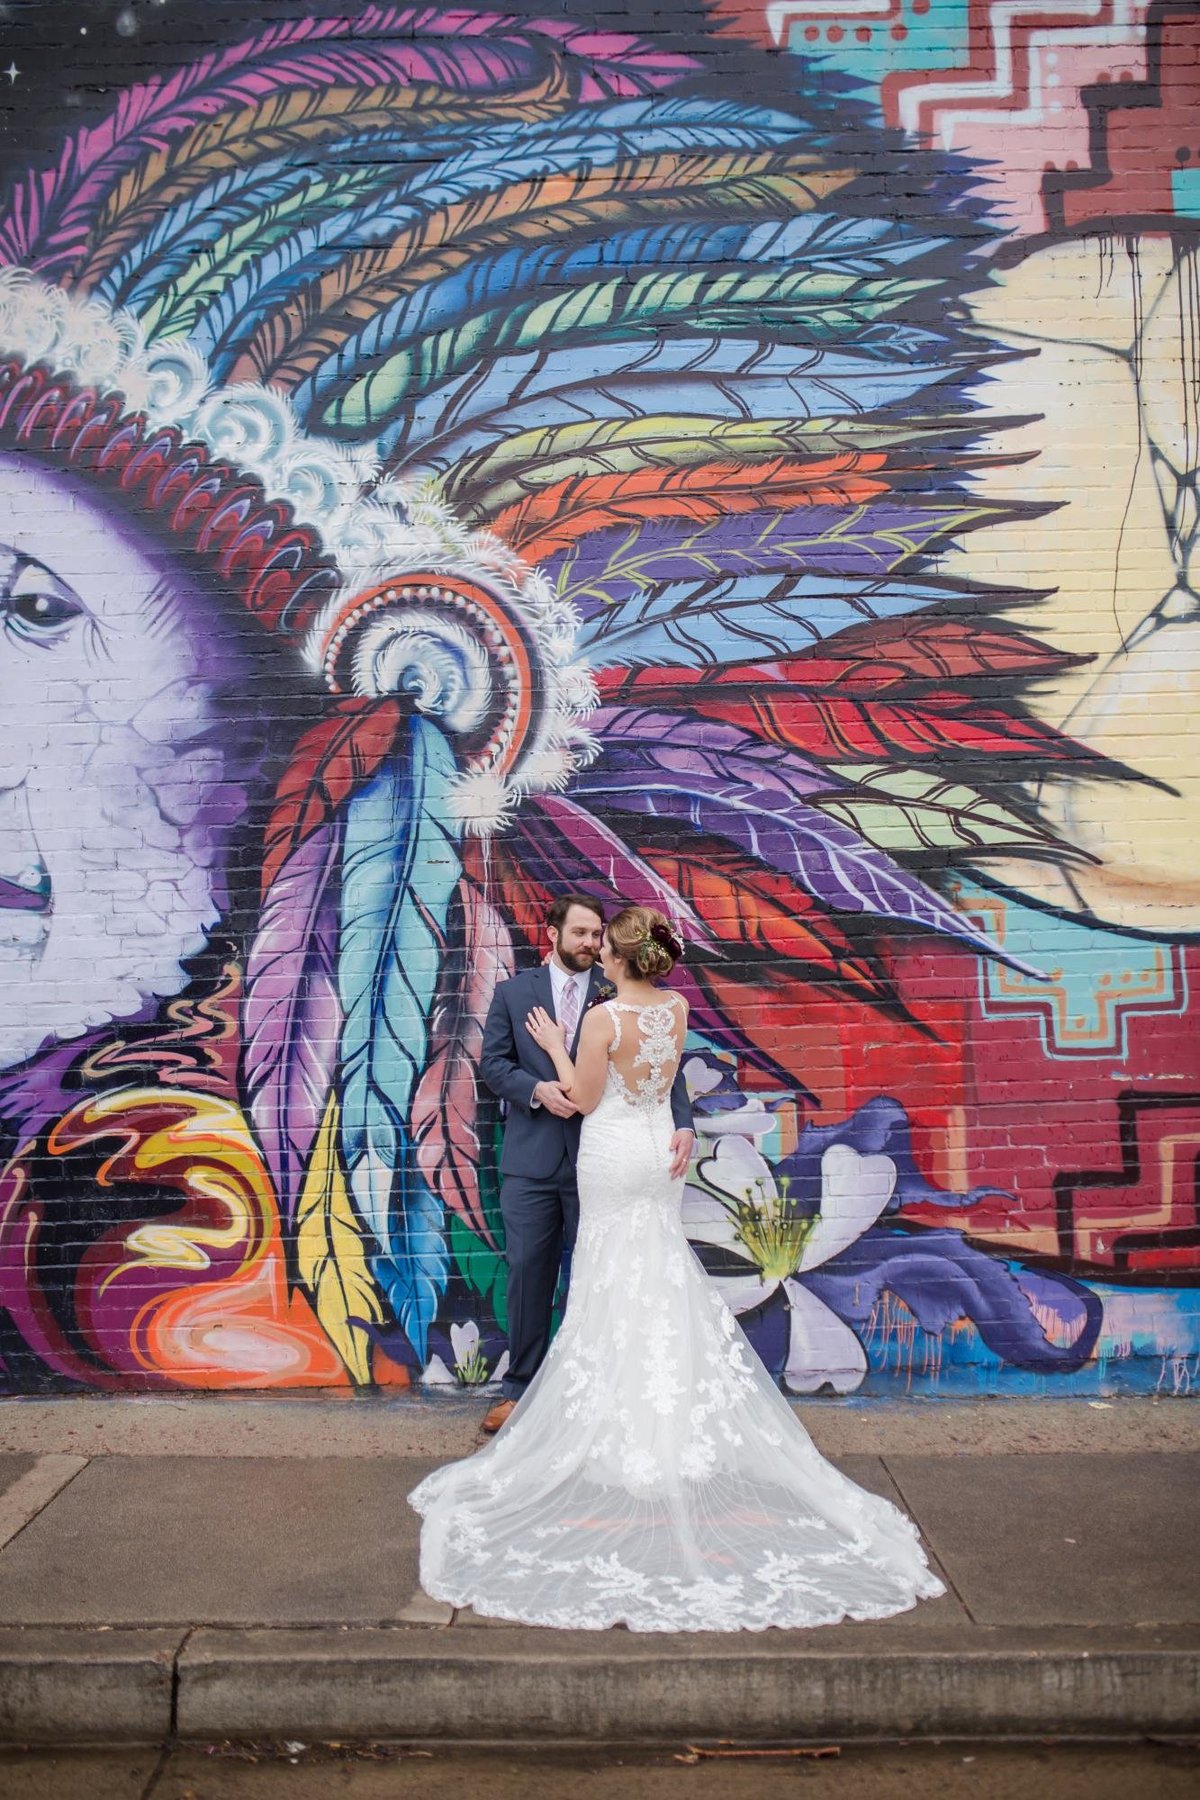 Wedding day with art mural